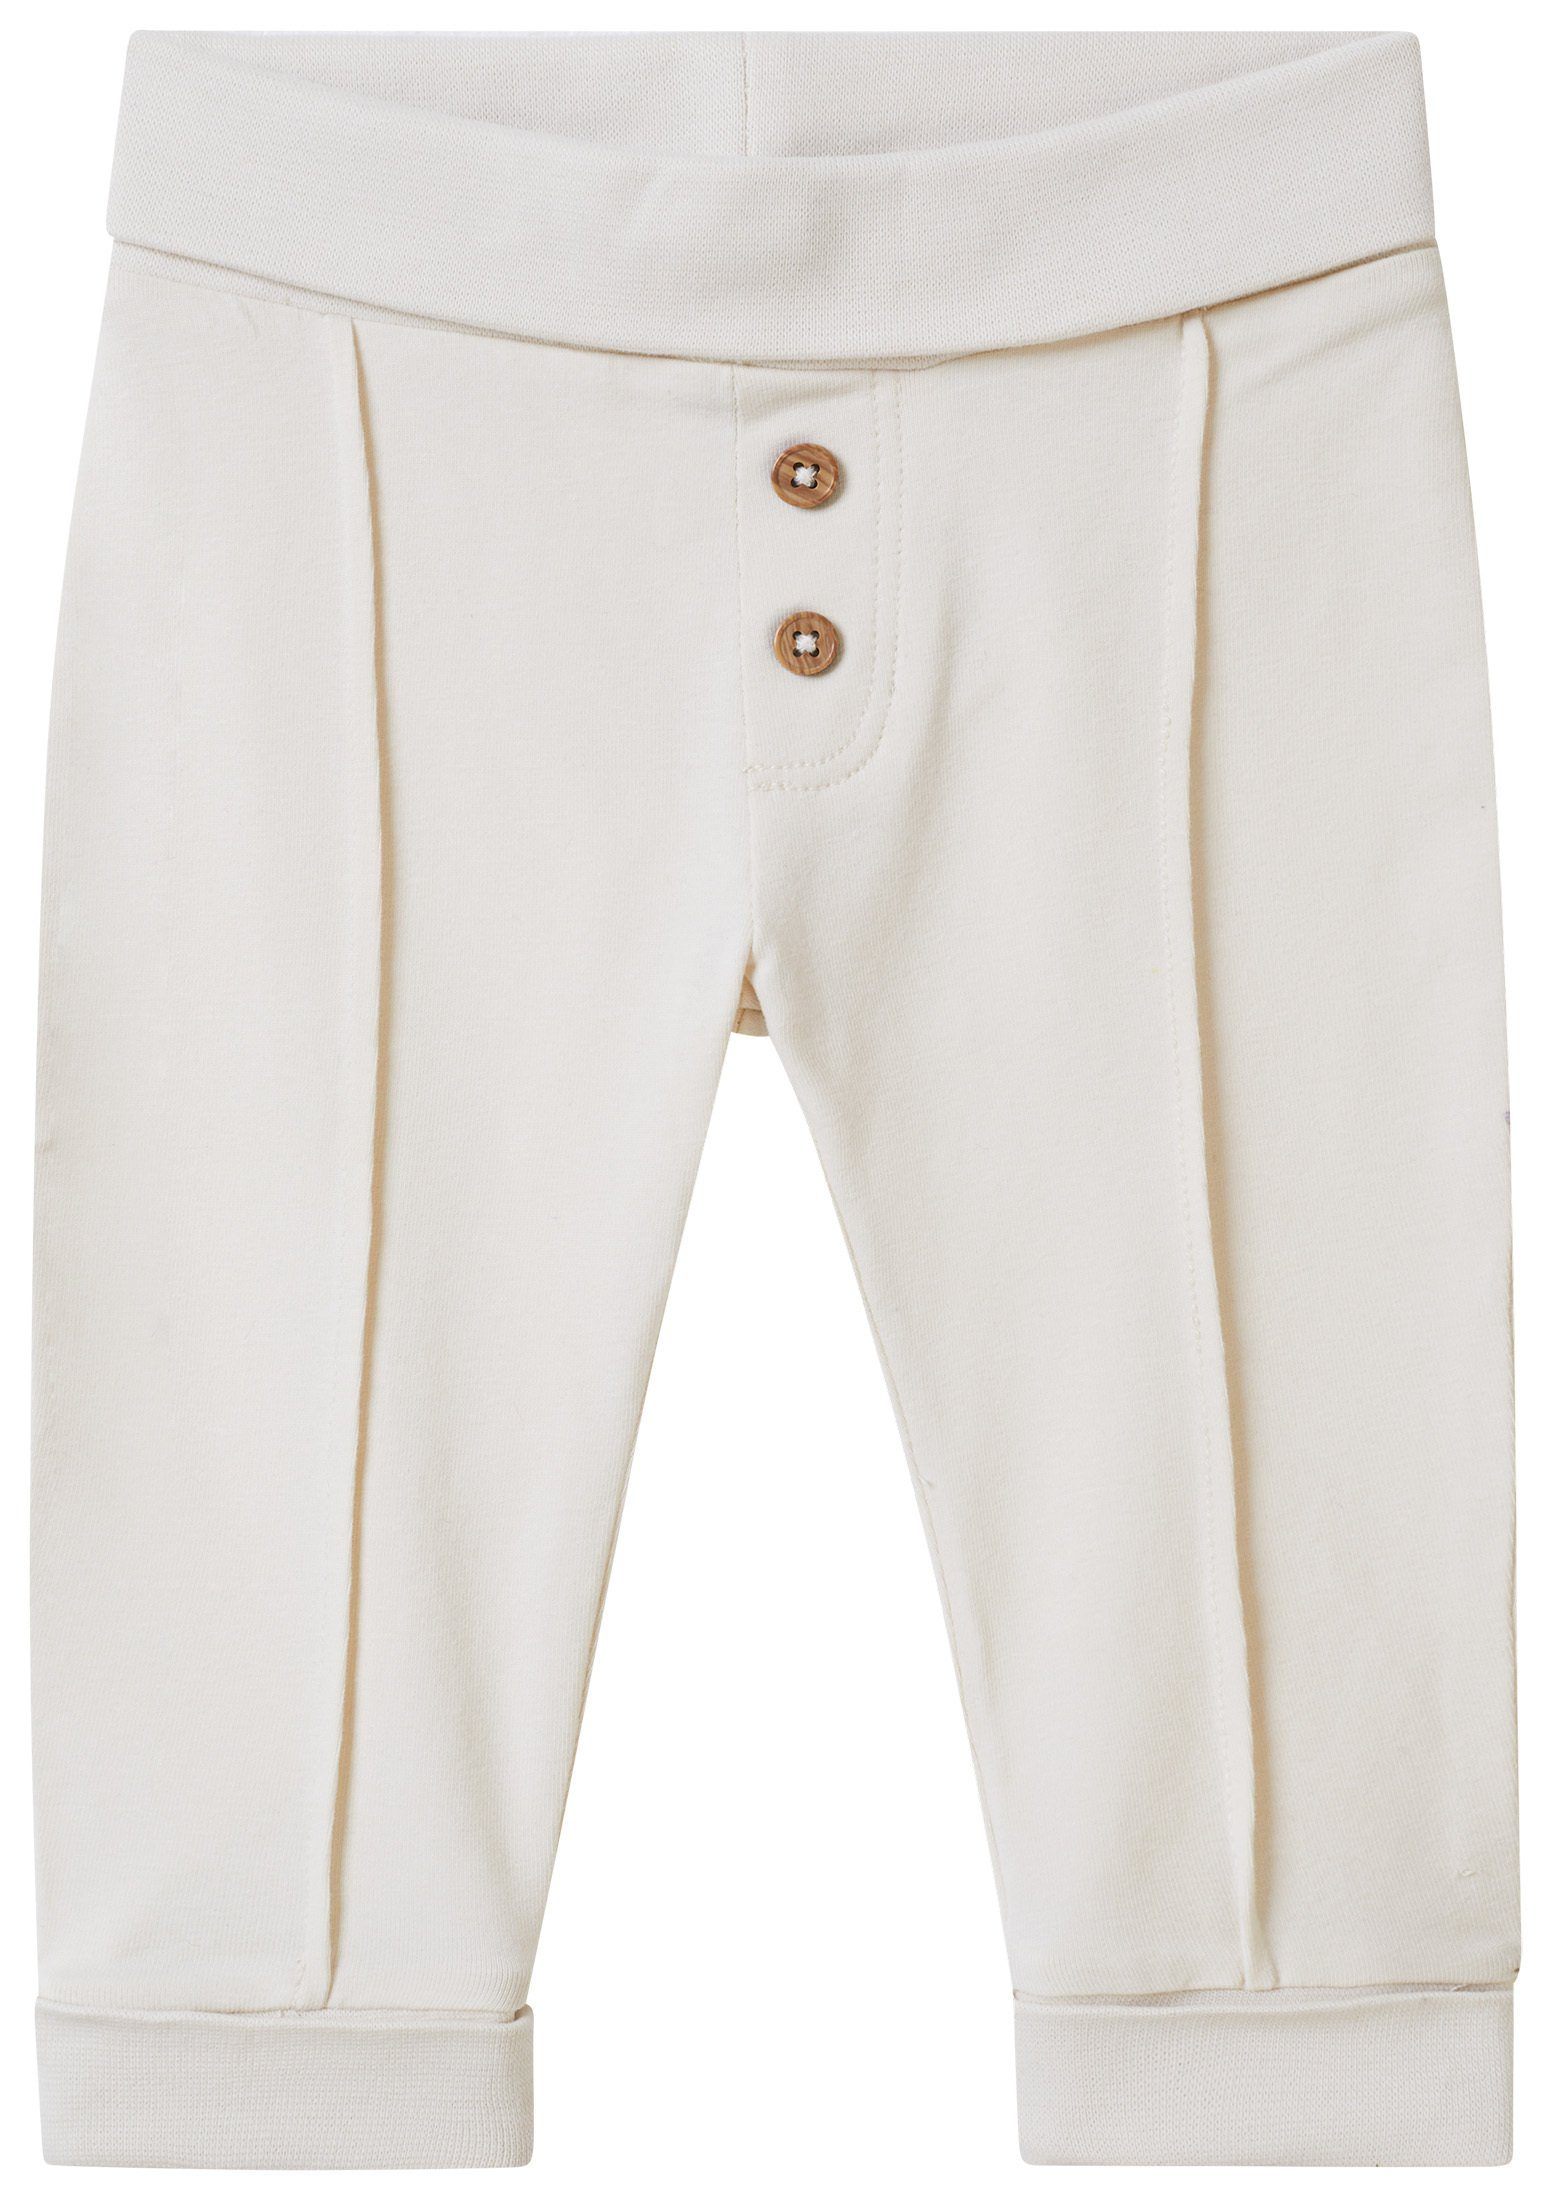 Noppies Stoffhose Noppies Hose Taneytown (1-tlg) Butter Cream